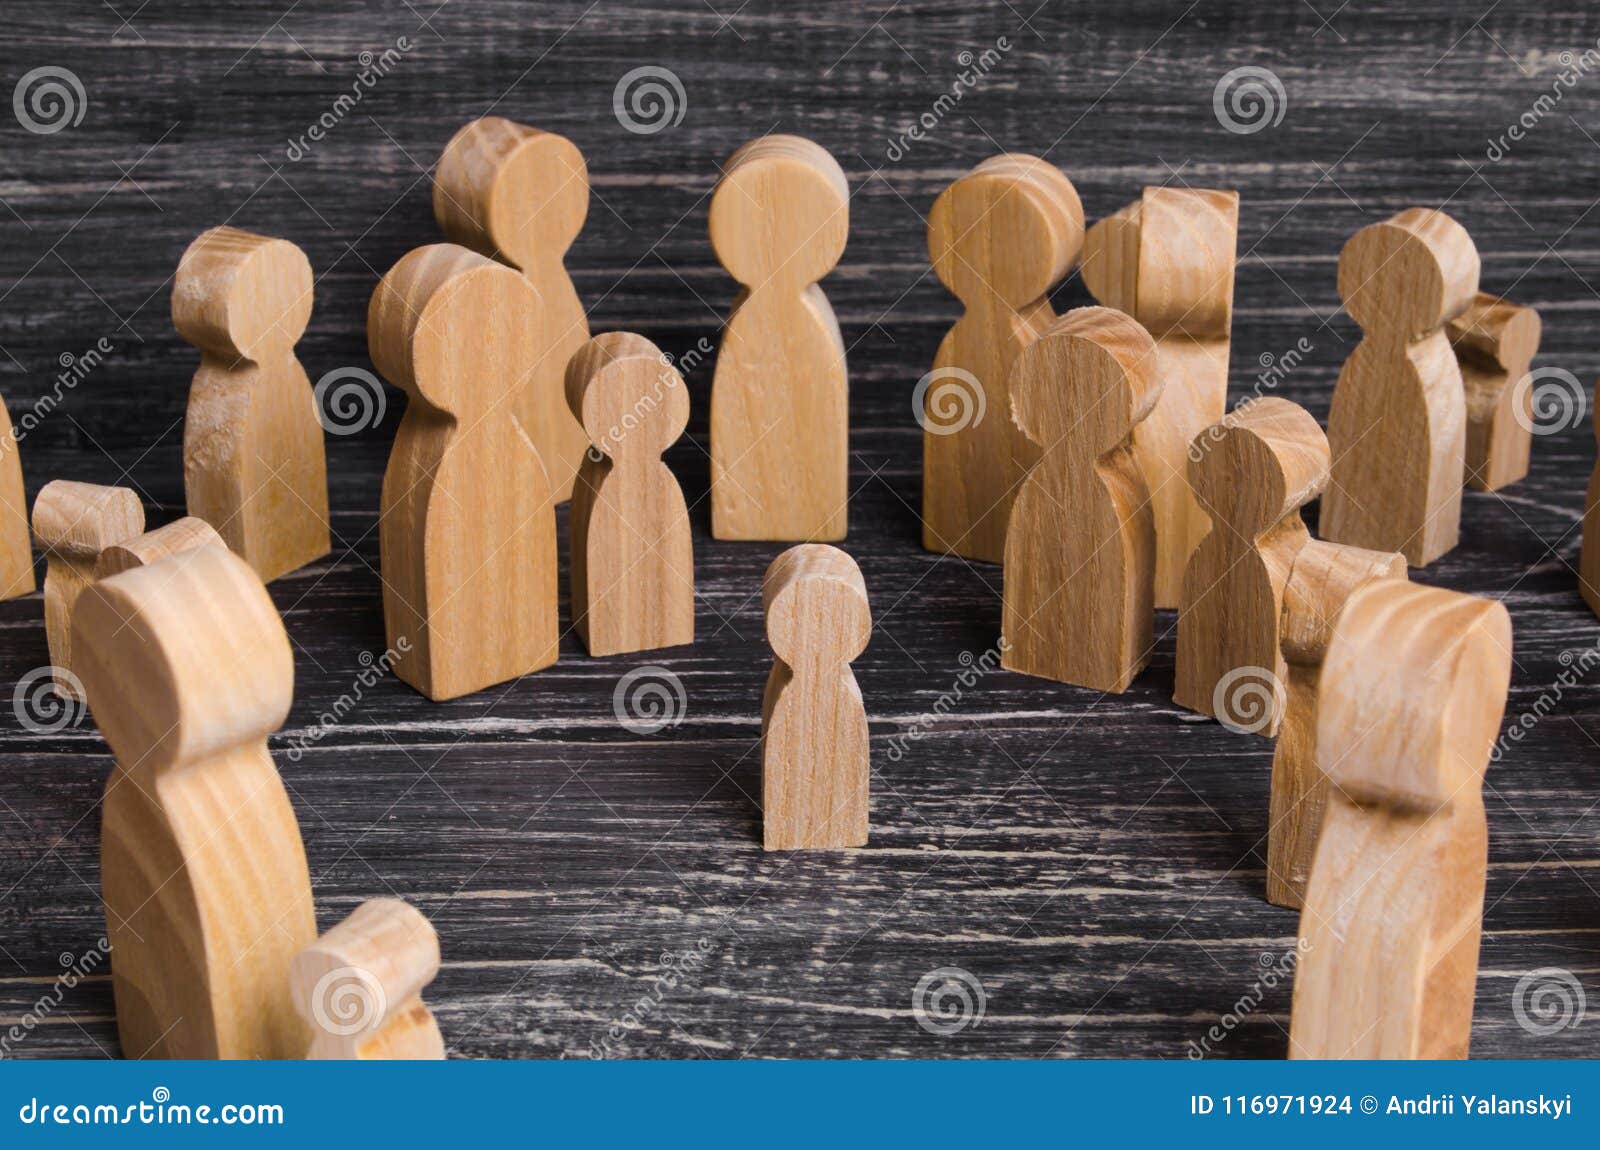 the child was lost in the crowd. a crowd of wooden figures of people surround a lost child. lost kid